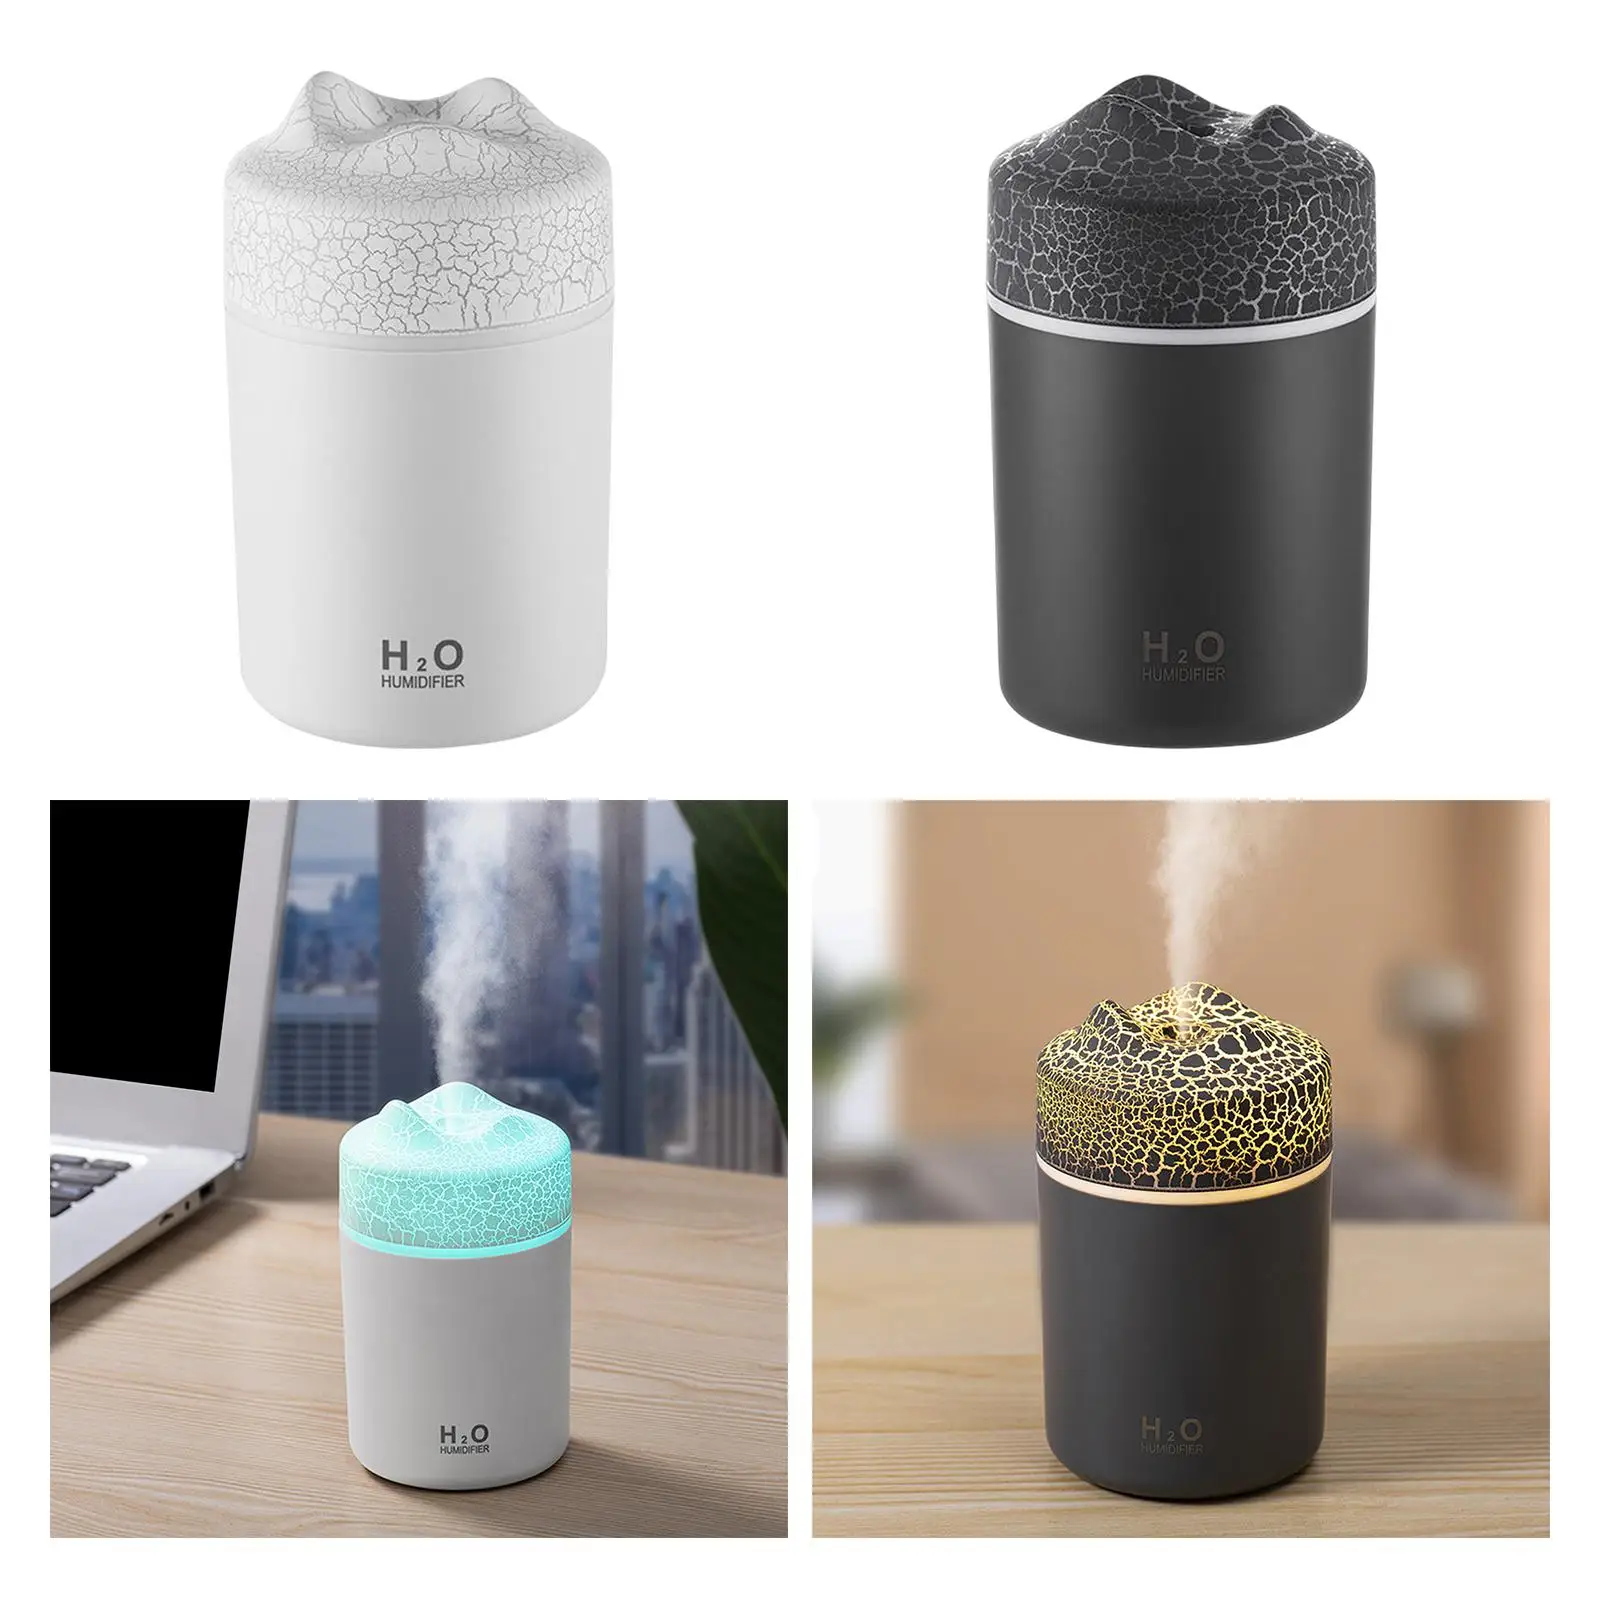 Cool Mini Humidifiers Small Night Light Air Humidifier Desktop Humidifier for Office Baby Bedroom Home NightStand